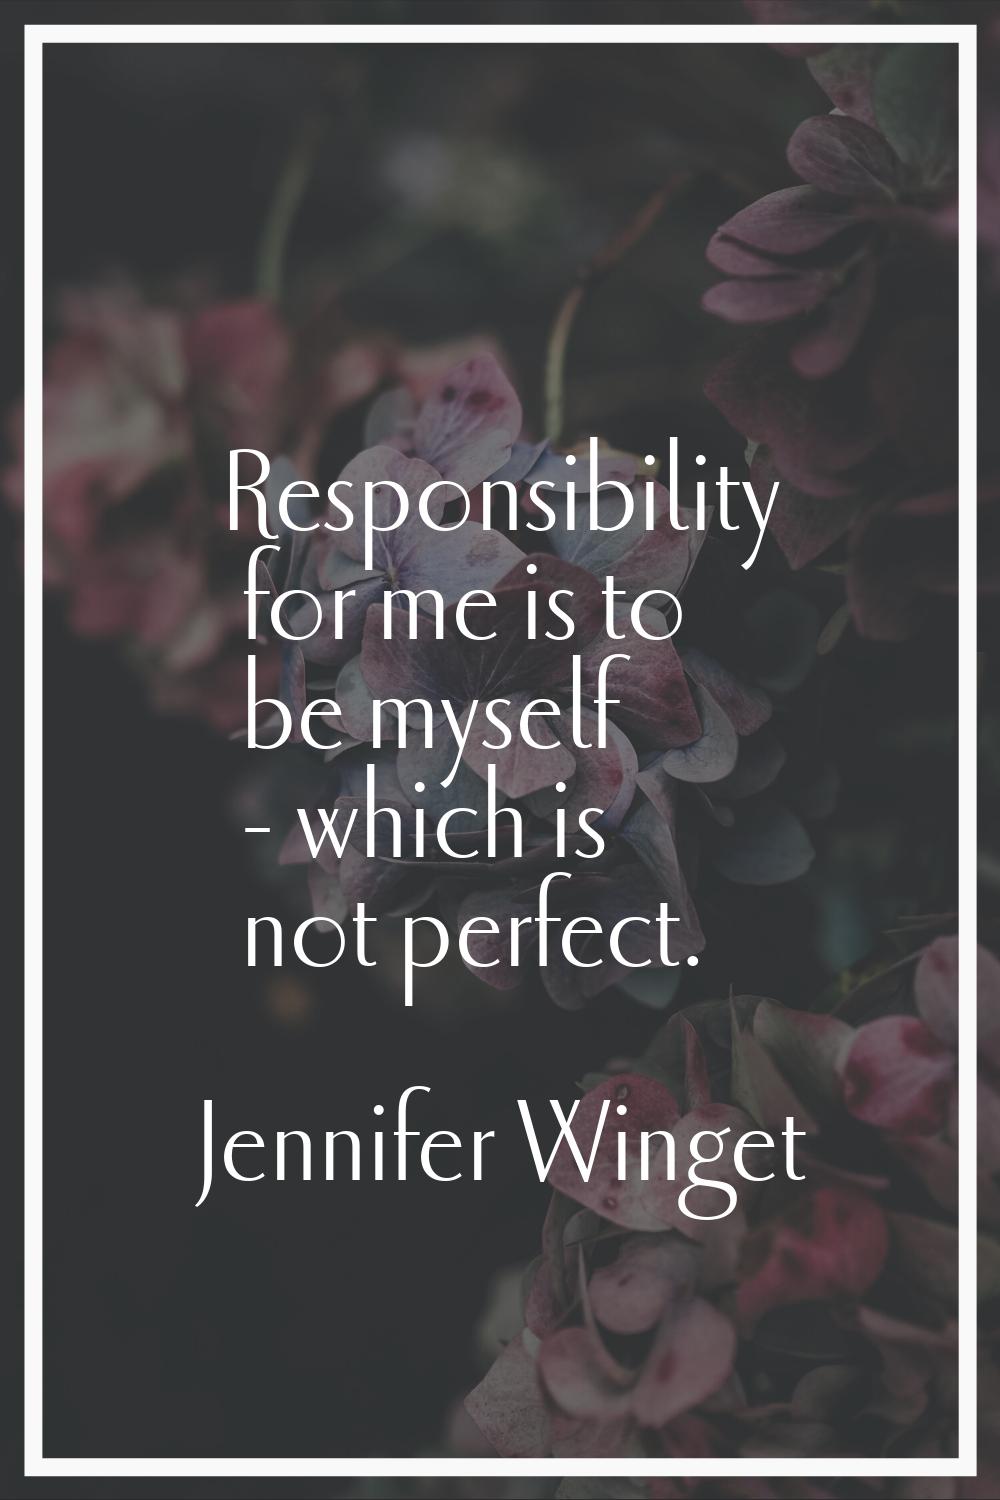 Responsibility for me is to be myself - which is not perfect.